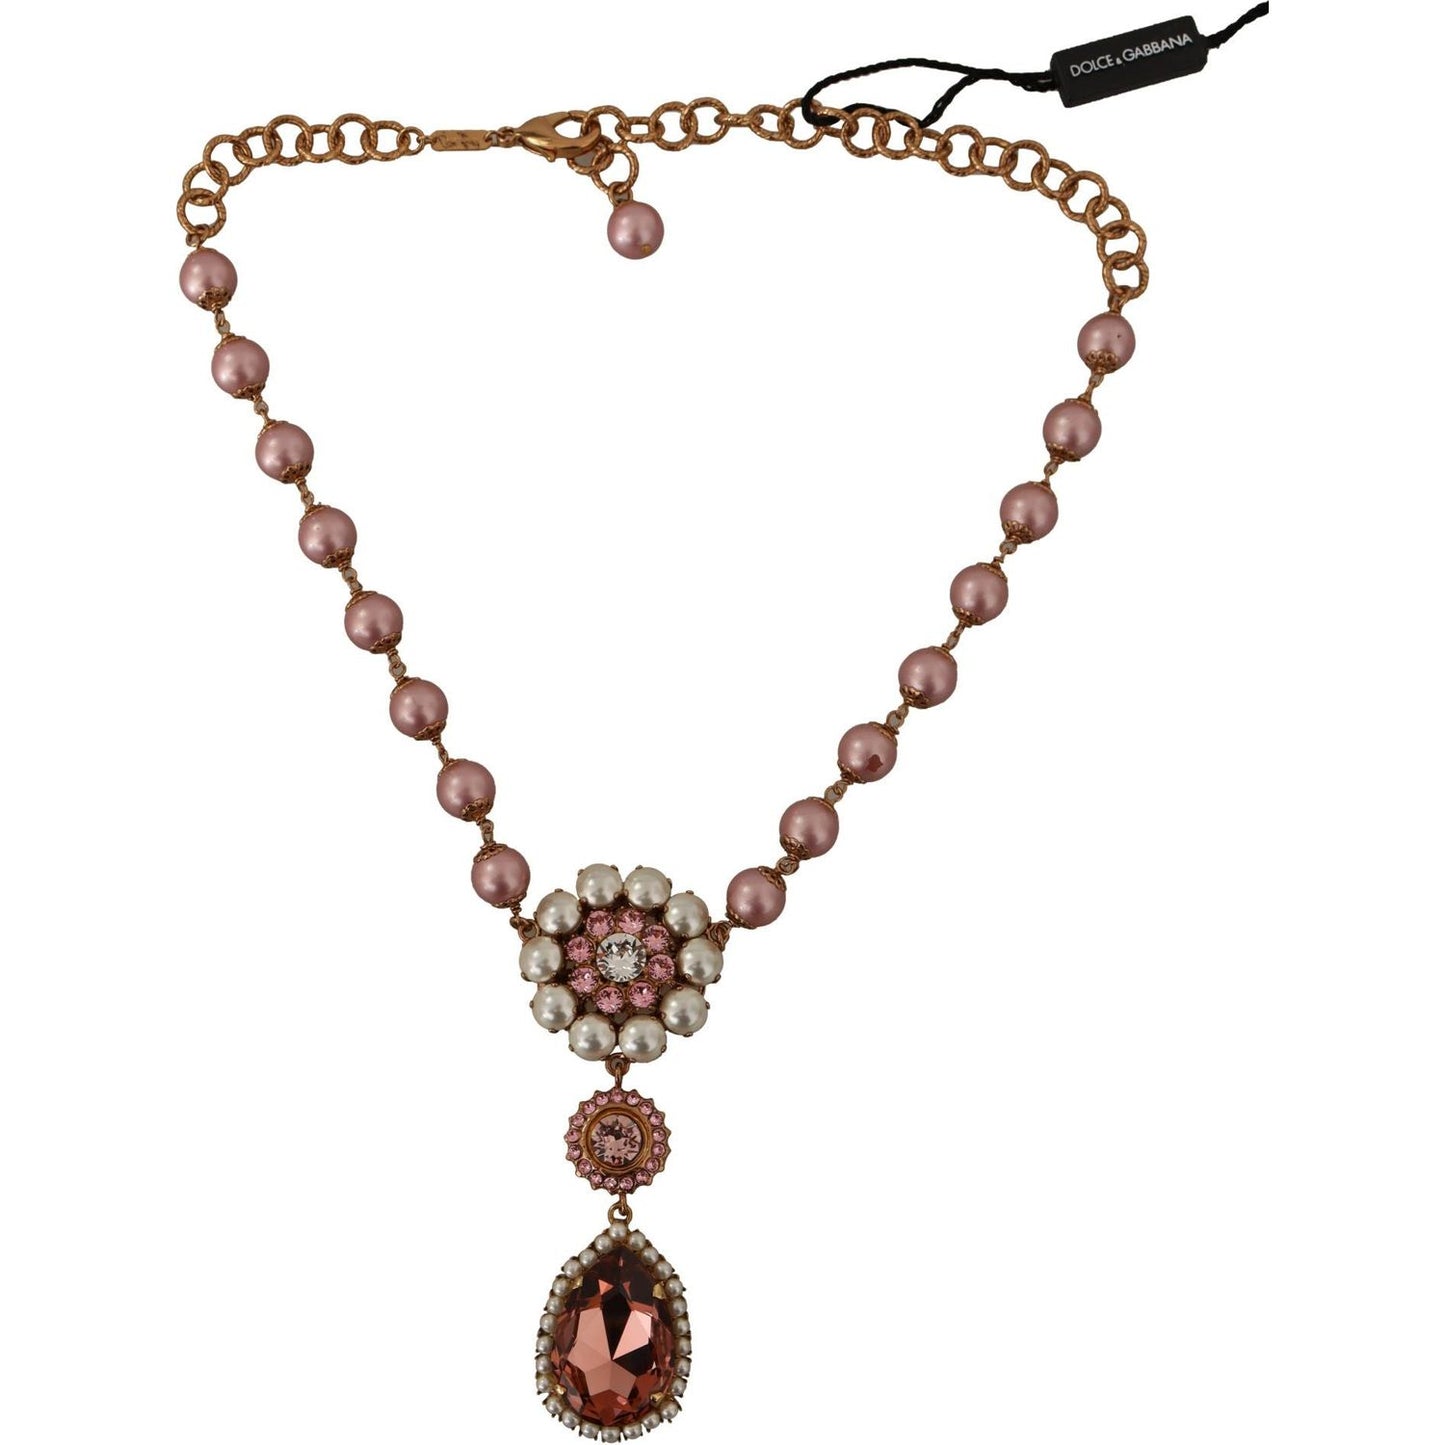 Dolce & Gabbana Elegant Gold Tone Faux Pearl Charm Necklace WOMAN NECKLACE gold-tone-brass-pink-beaded-pearls-crystal-pendant-necklace